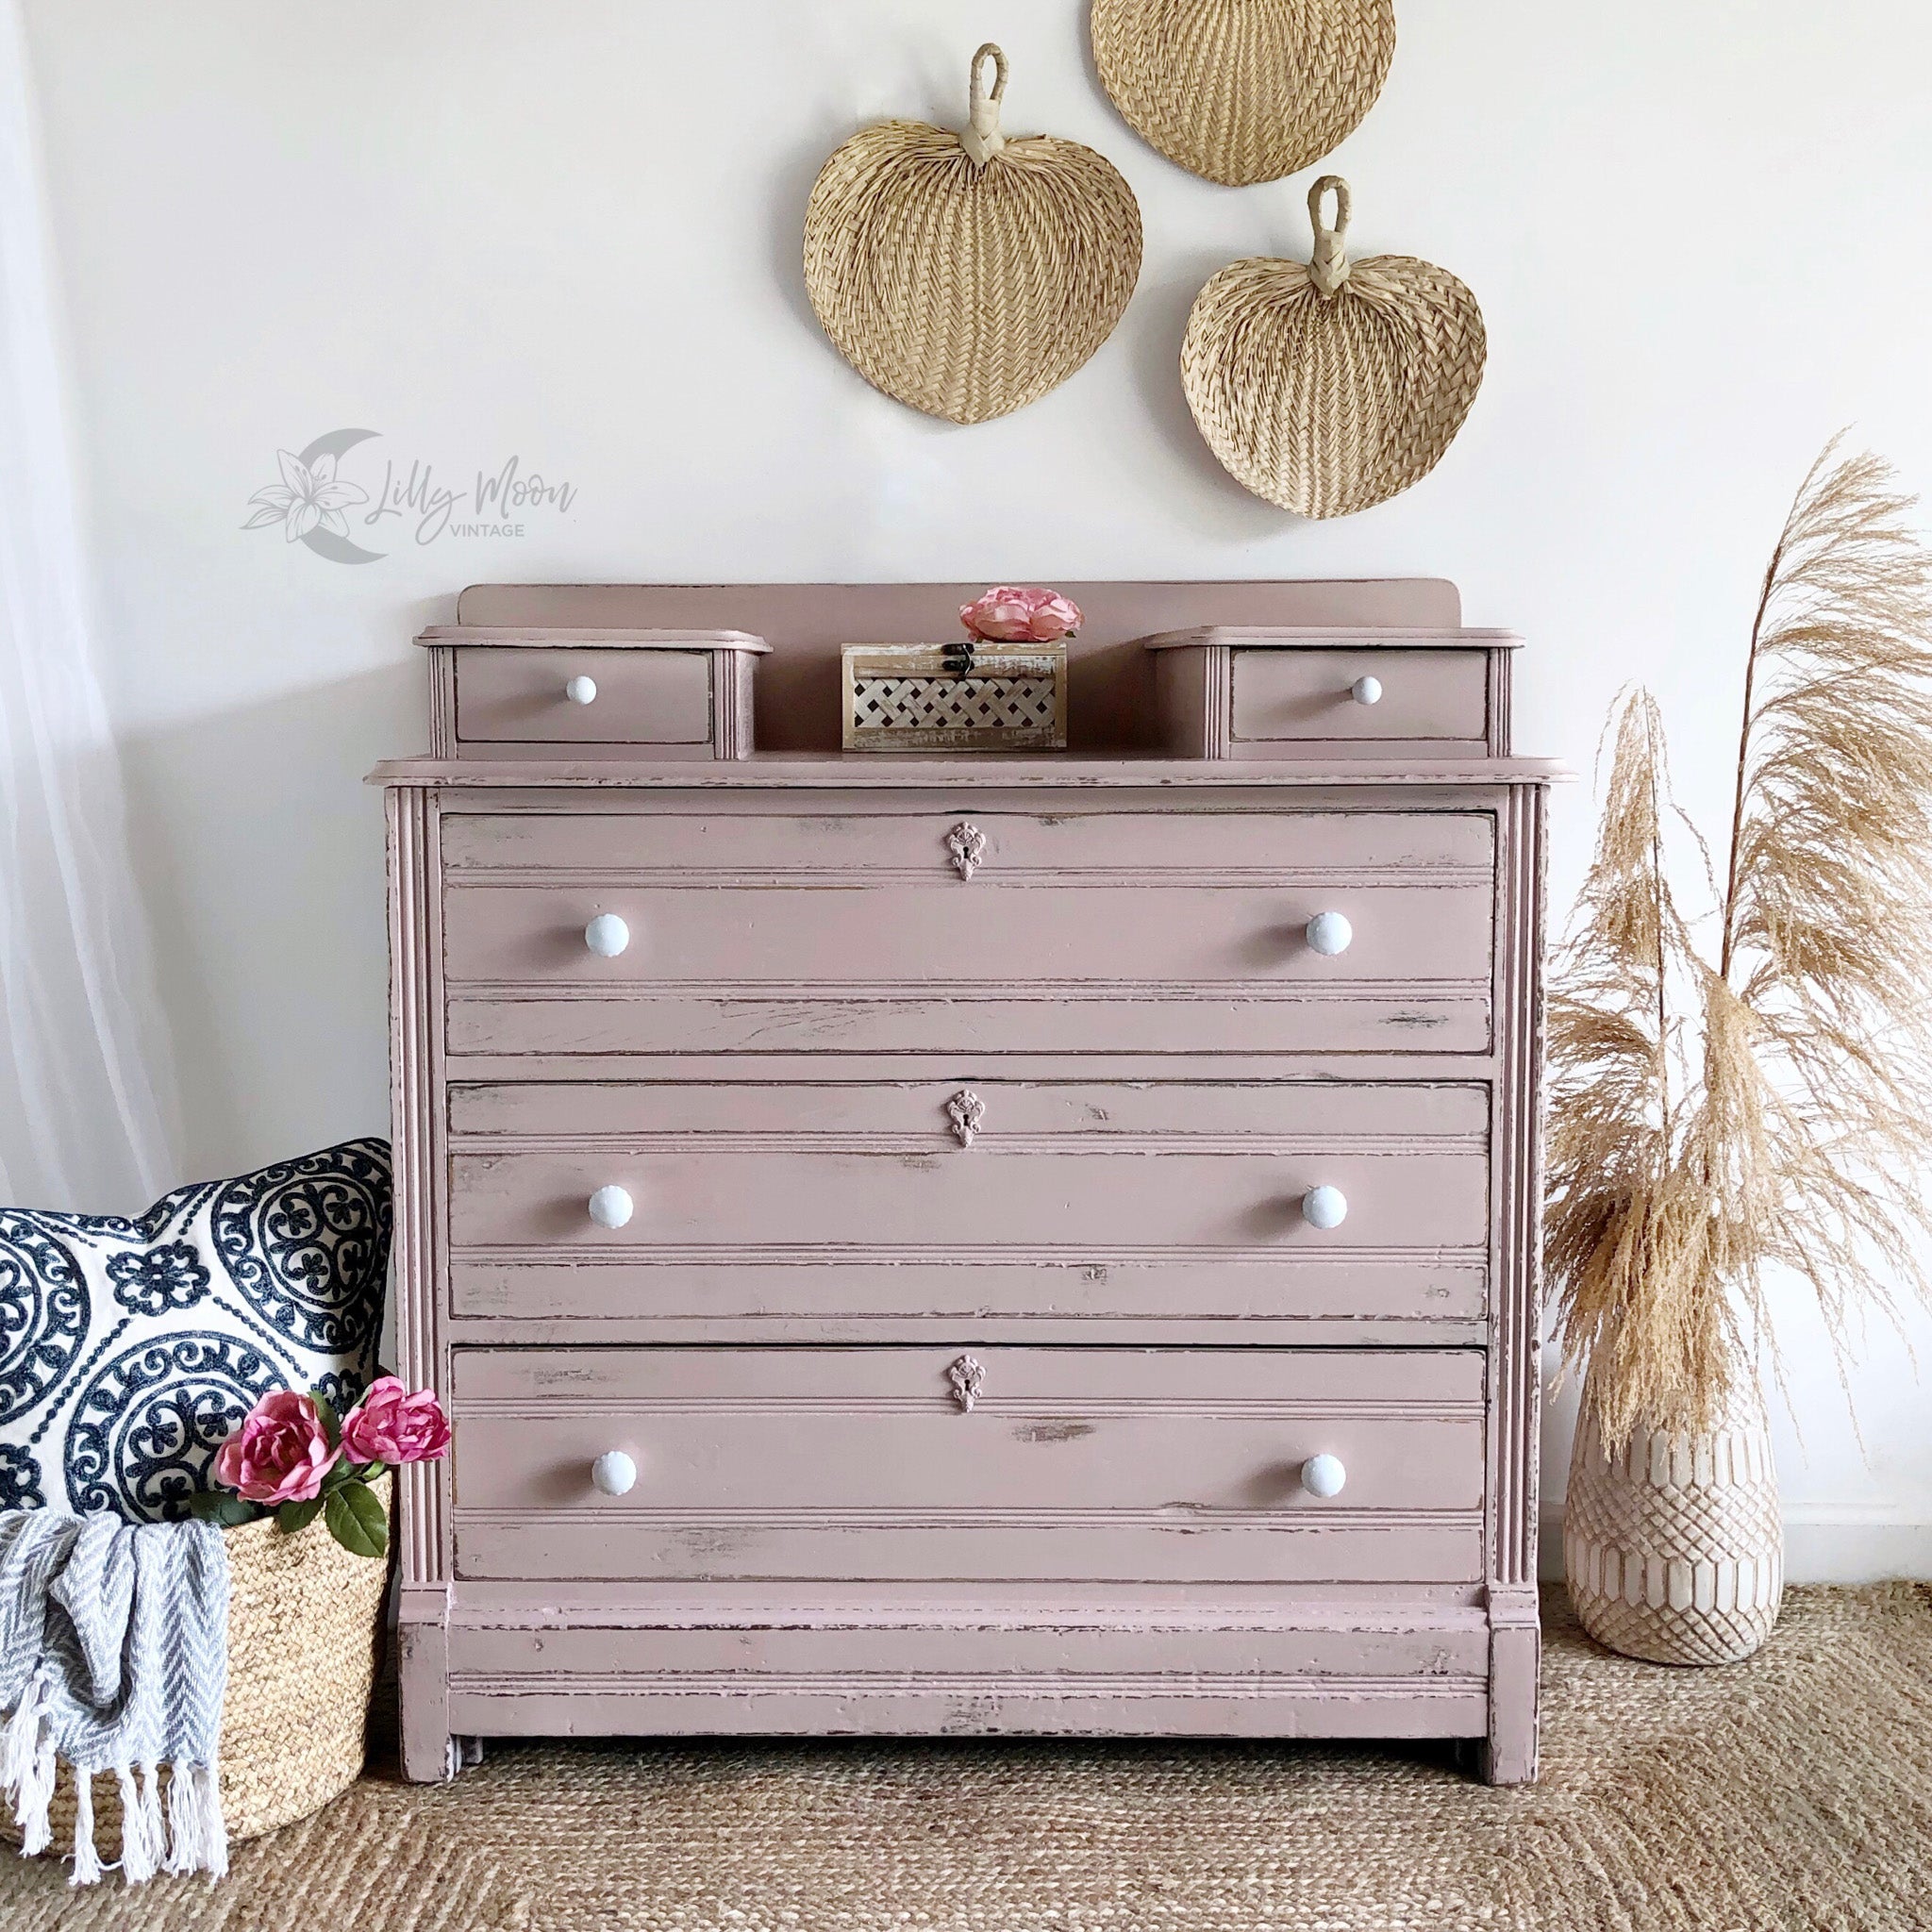 A vintage dresser refurbished by Lilly Moon Vintage is painted in Dixie Belle's Tea Rose chalk mineral paint.